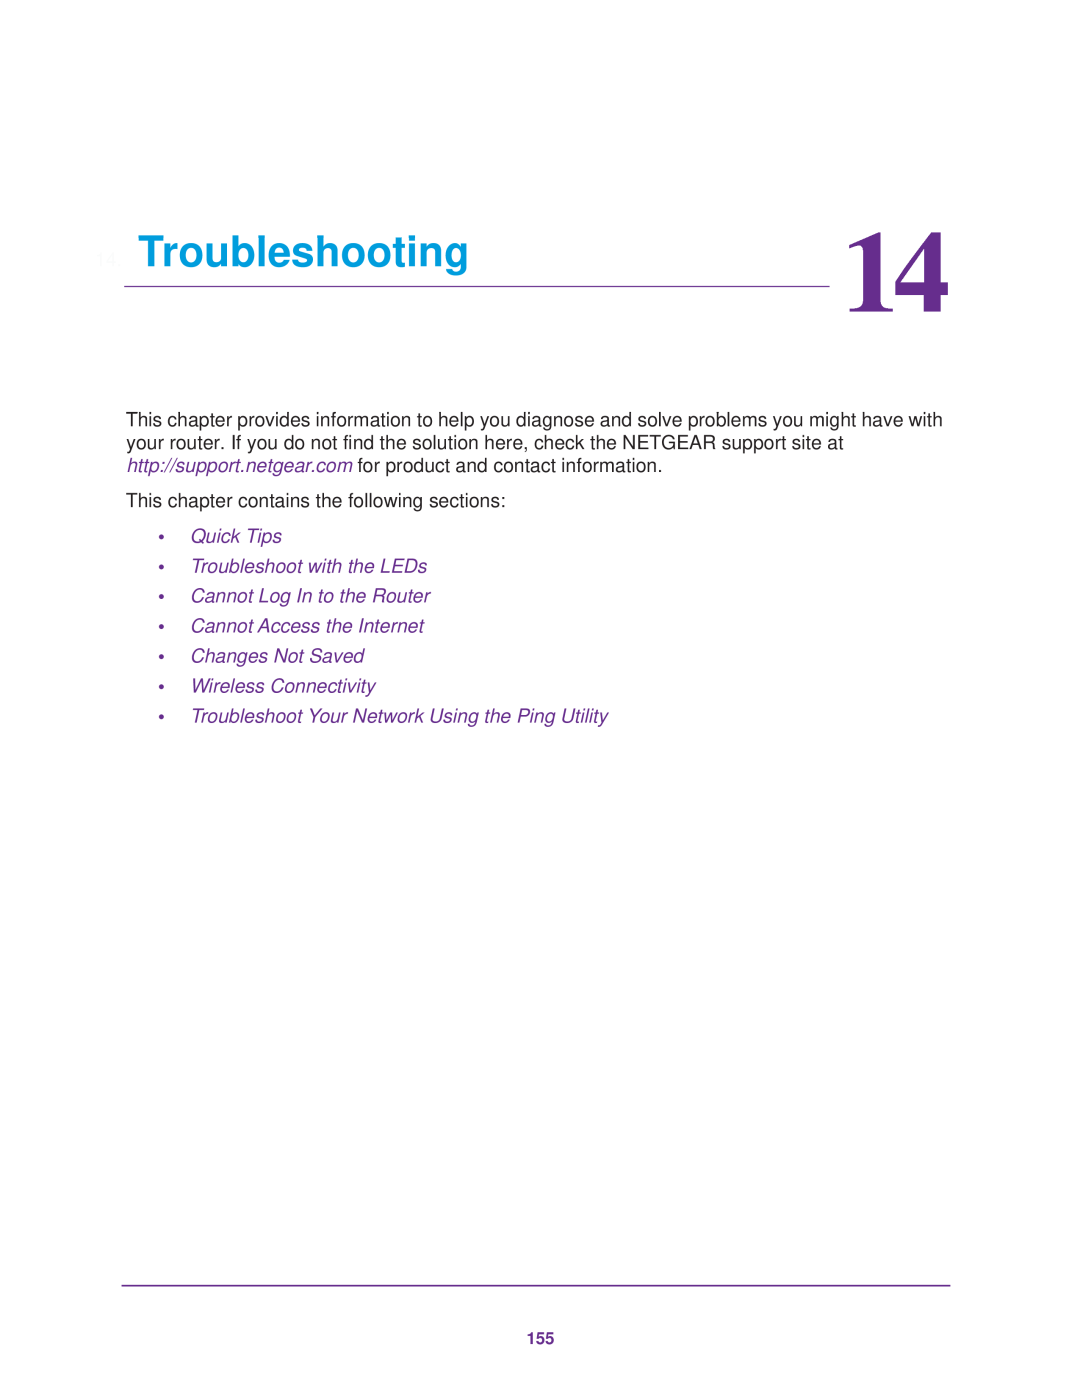 NETGEAR R7000 user manual Troubleshooting, Quick Tips Troubleshoot with the LEDs Cannot Log In to the Router 